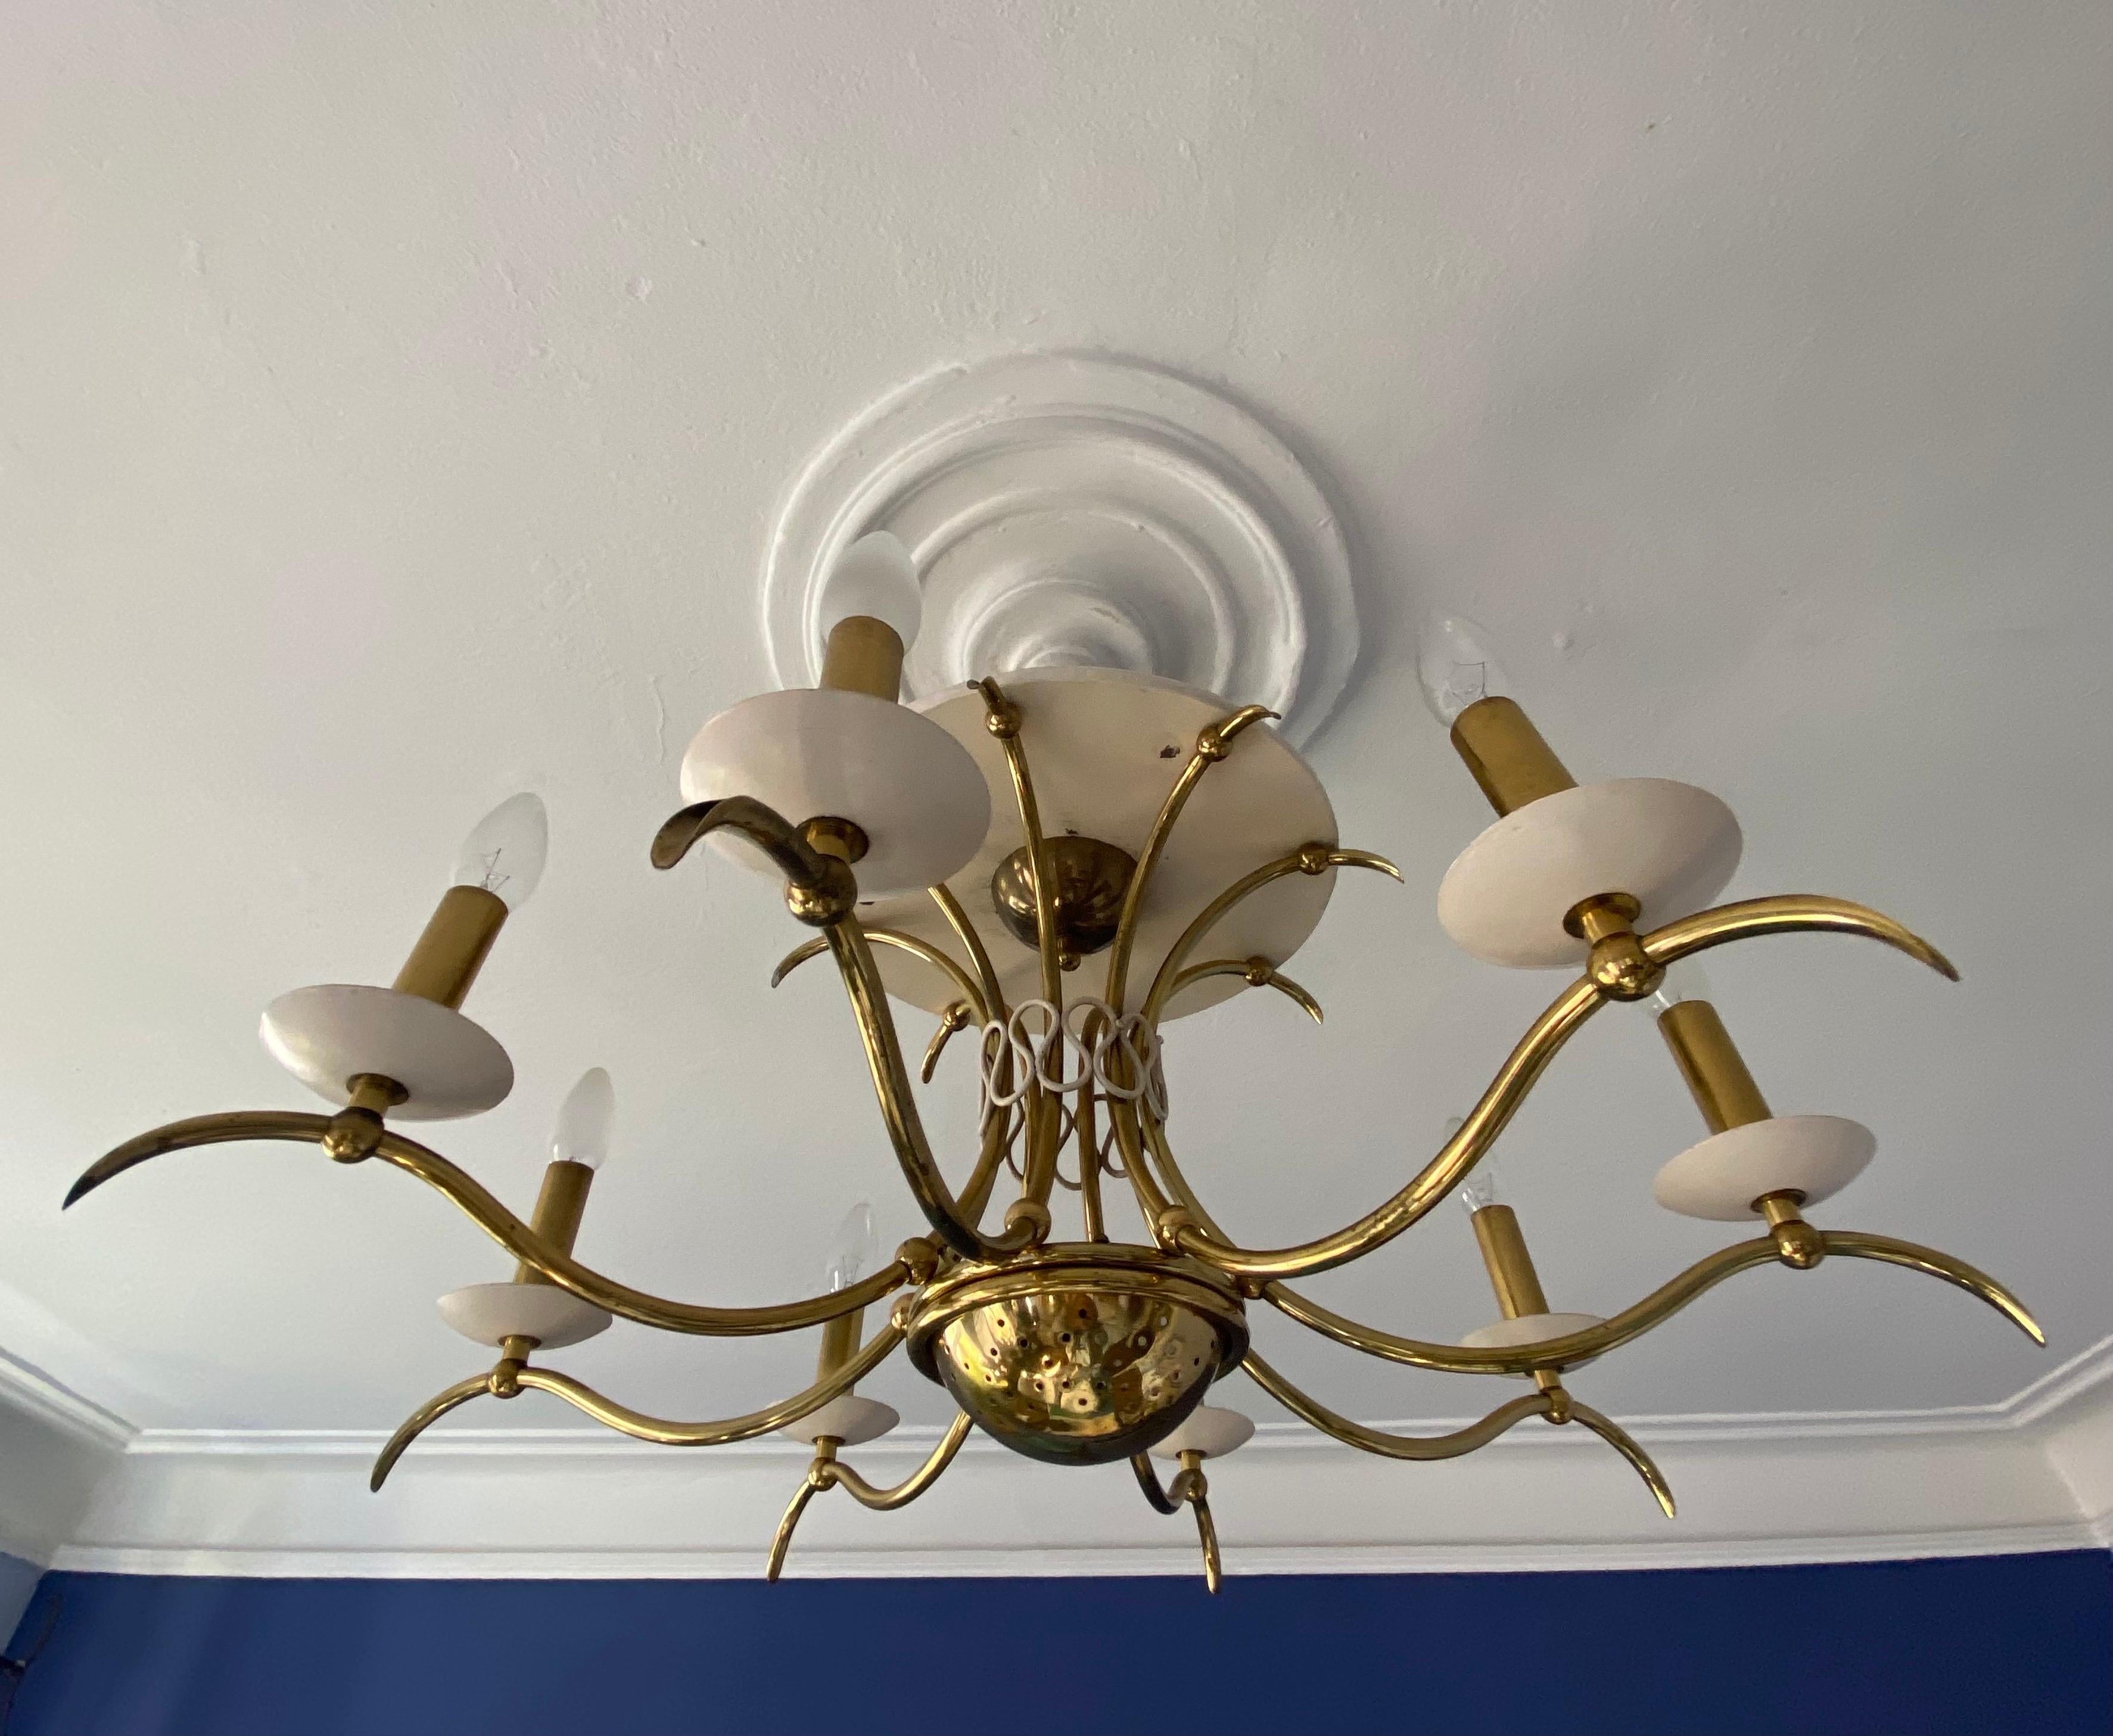 This Midcentury very elegant brass chandelier has in the middle of the structure an integrated small perforated Uplighter to create a really beautiful light distribution.
It was designed in the early 1950s to mount alternatively directly on a